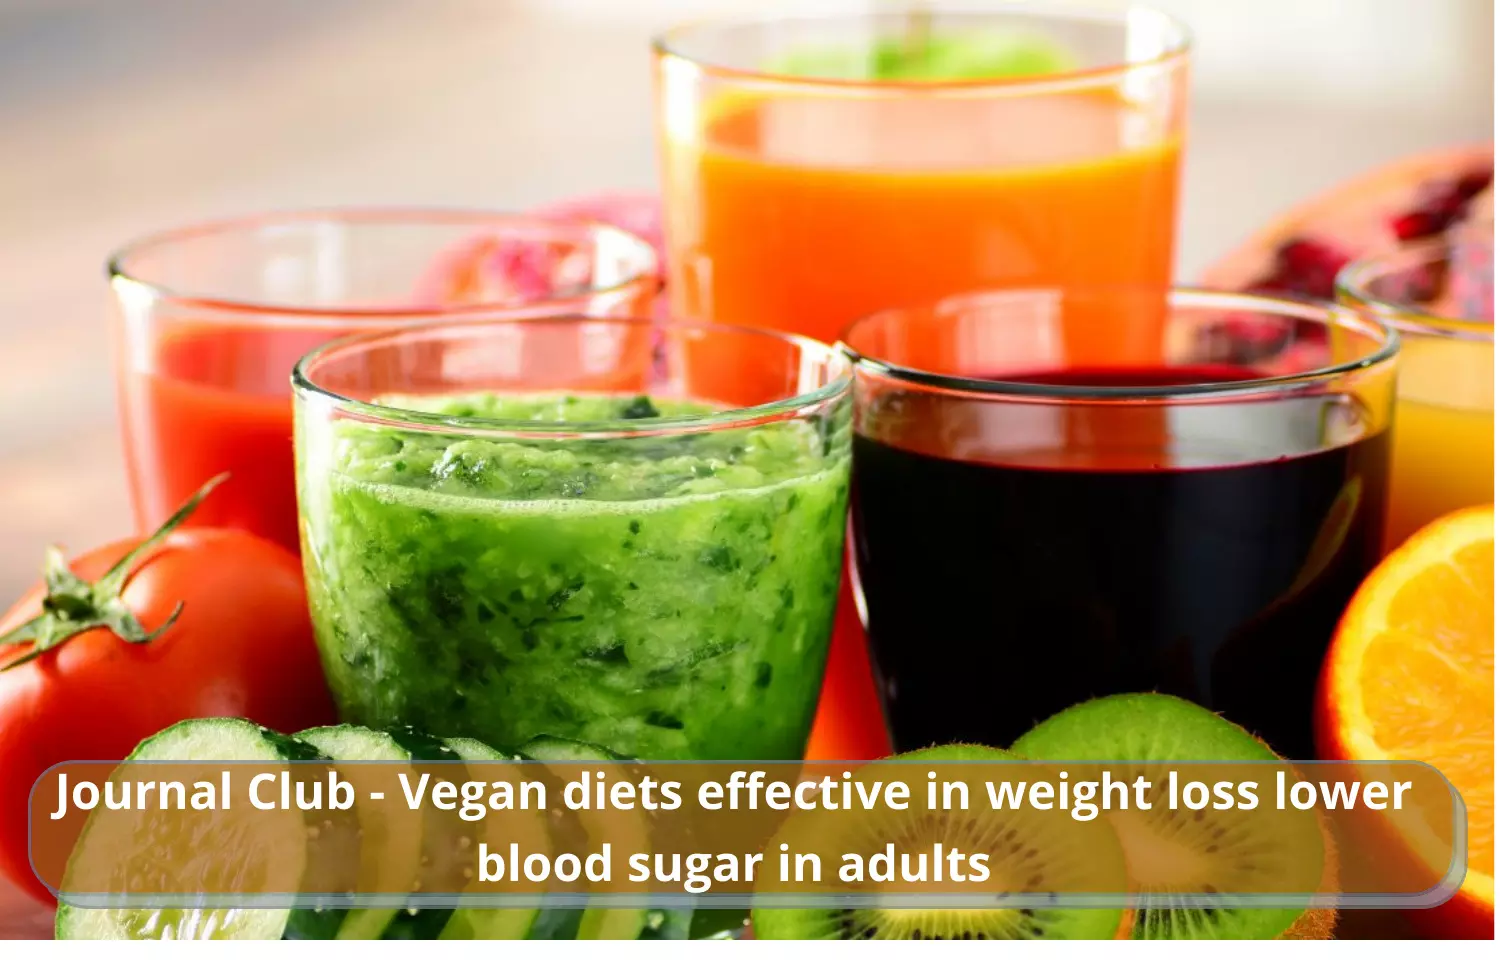 Journal Club - Vegan diets effective in weight loss lower blood sugar in adults